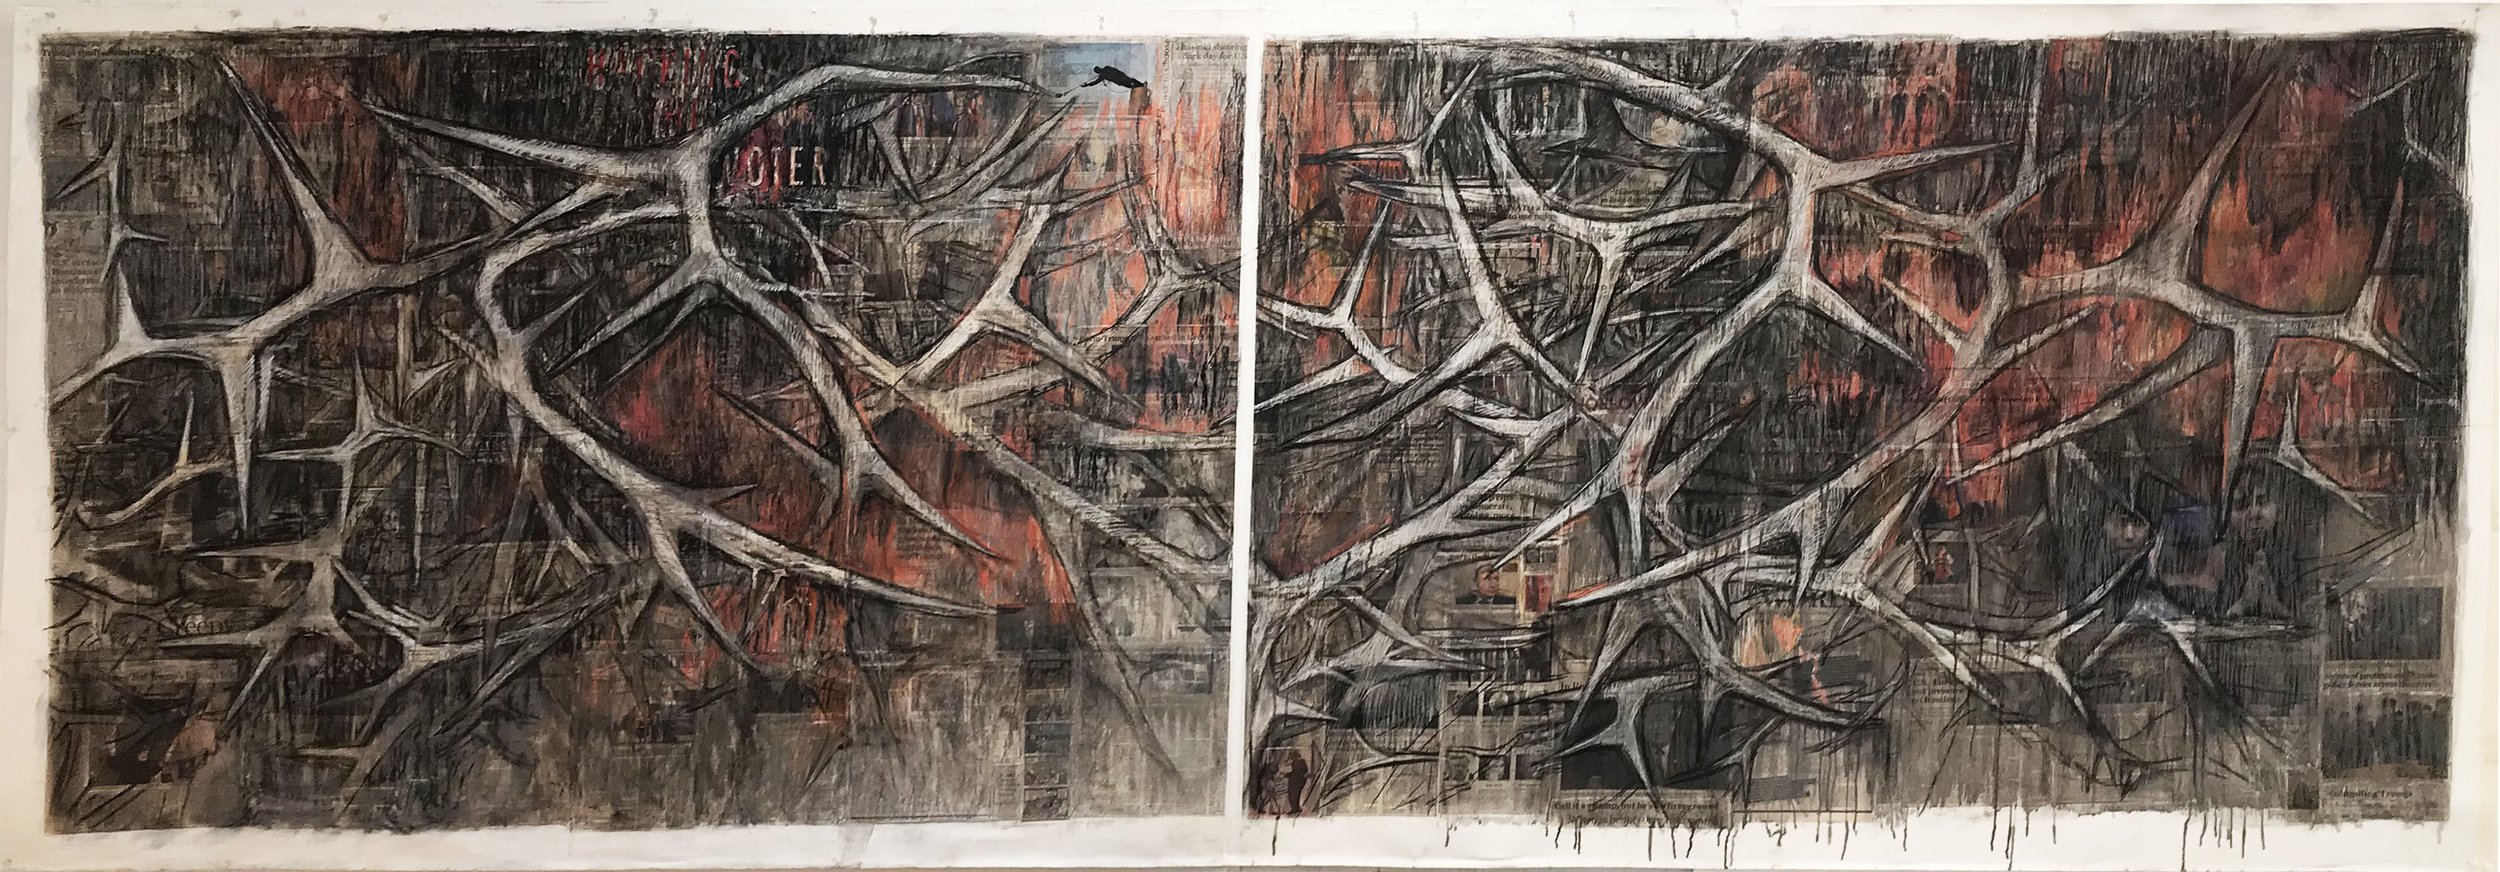 2Ai(1) - Thorny issues - diptych, 52x120 in. charcoal, paste. on collaged paper 2020.jpg